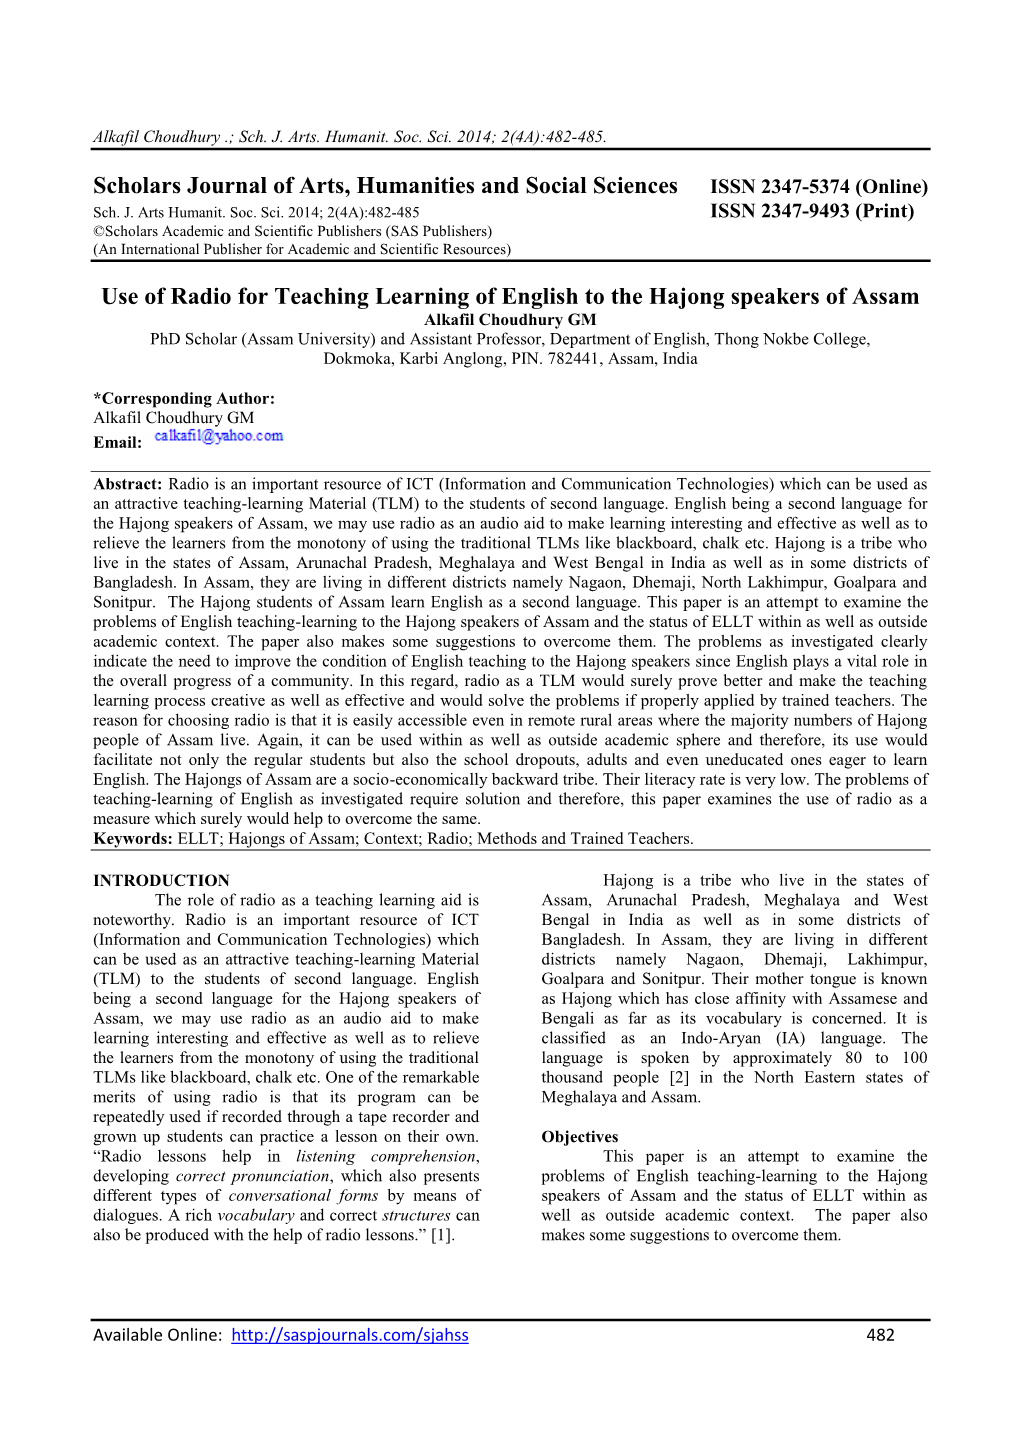 Use of Radio for Teaching Learning of Englis